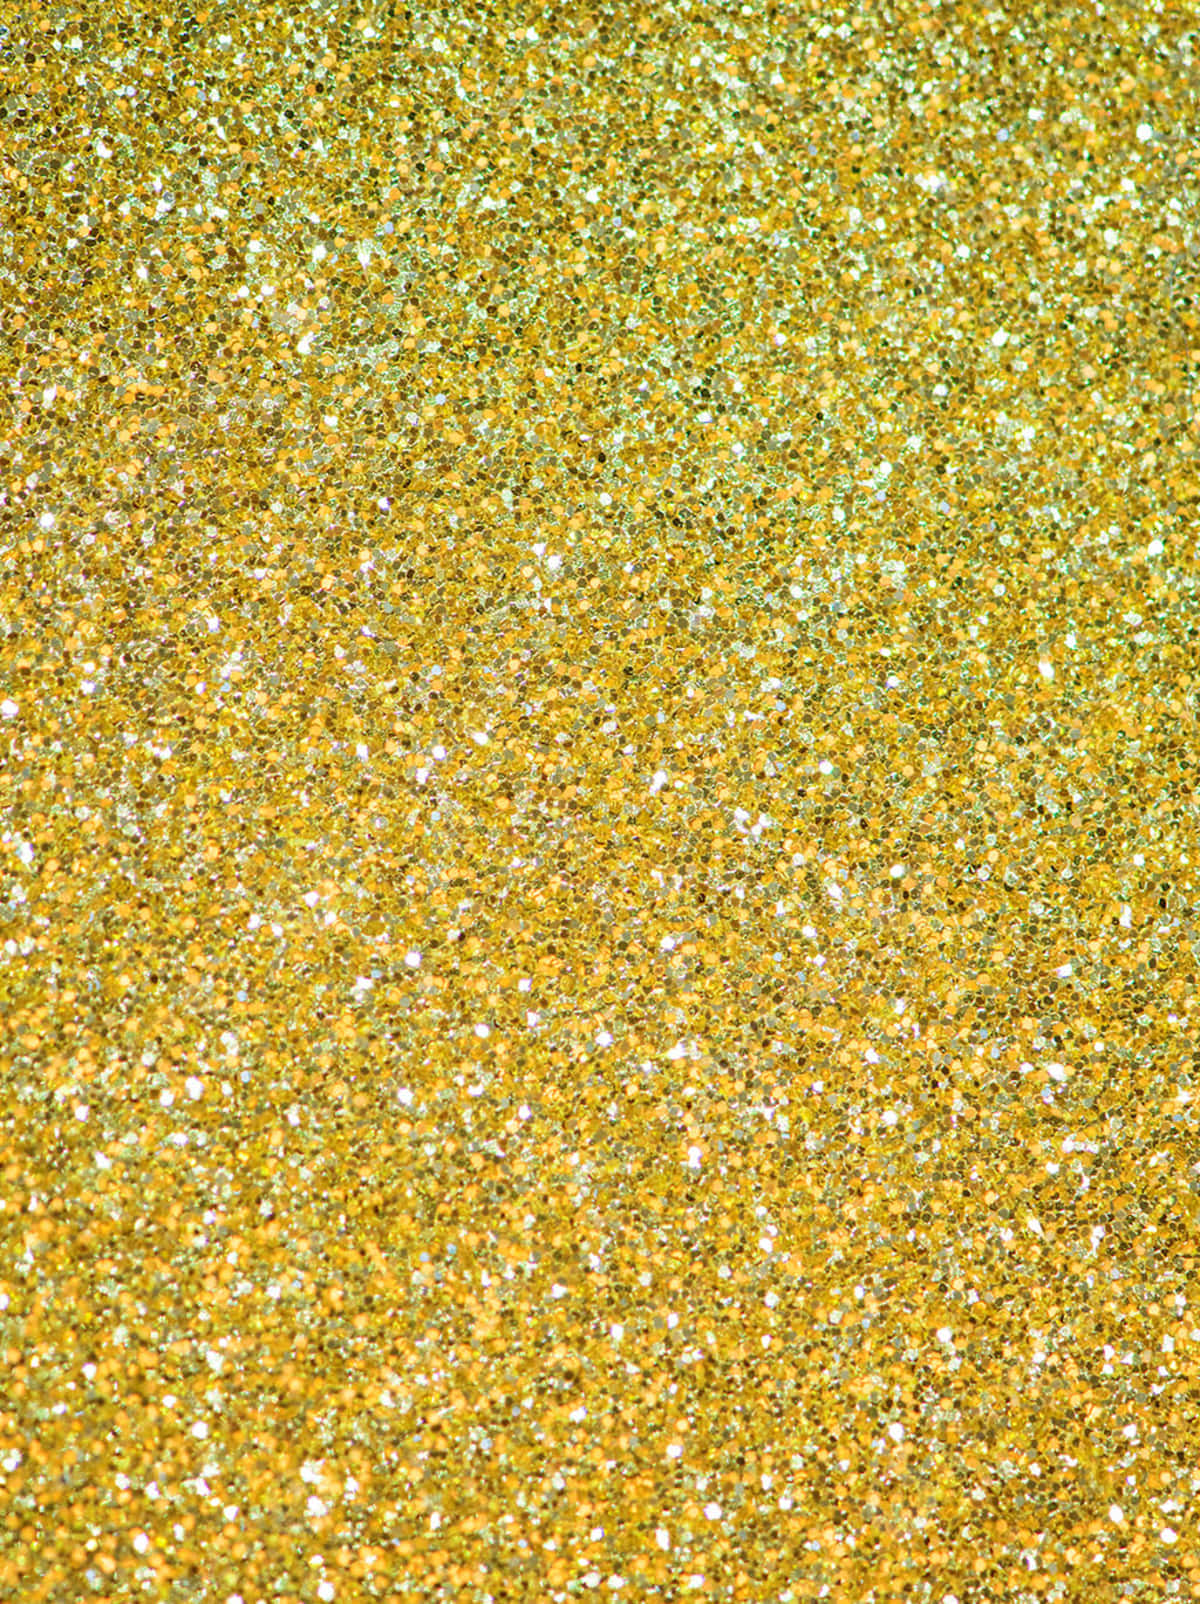 Delight in the cheer of yellow glitter